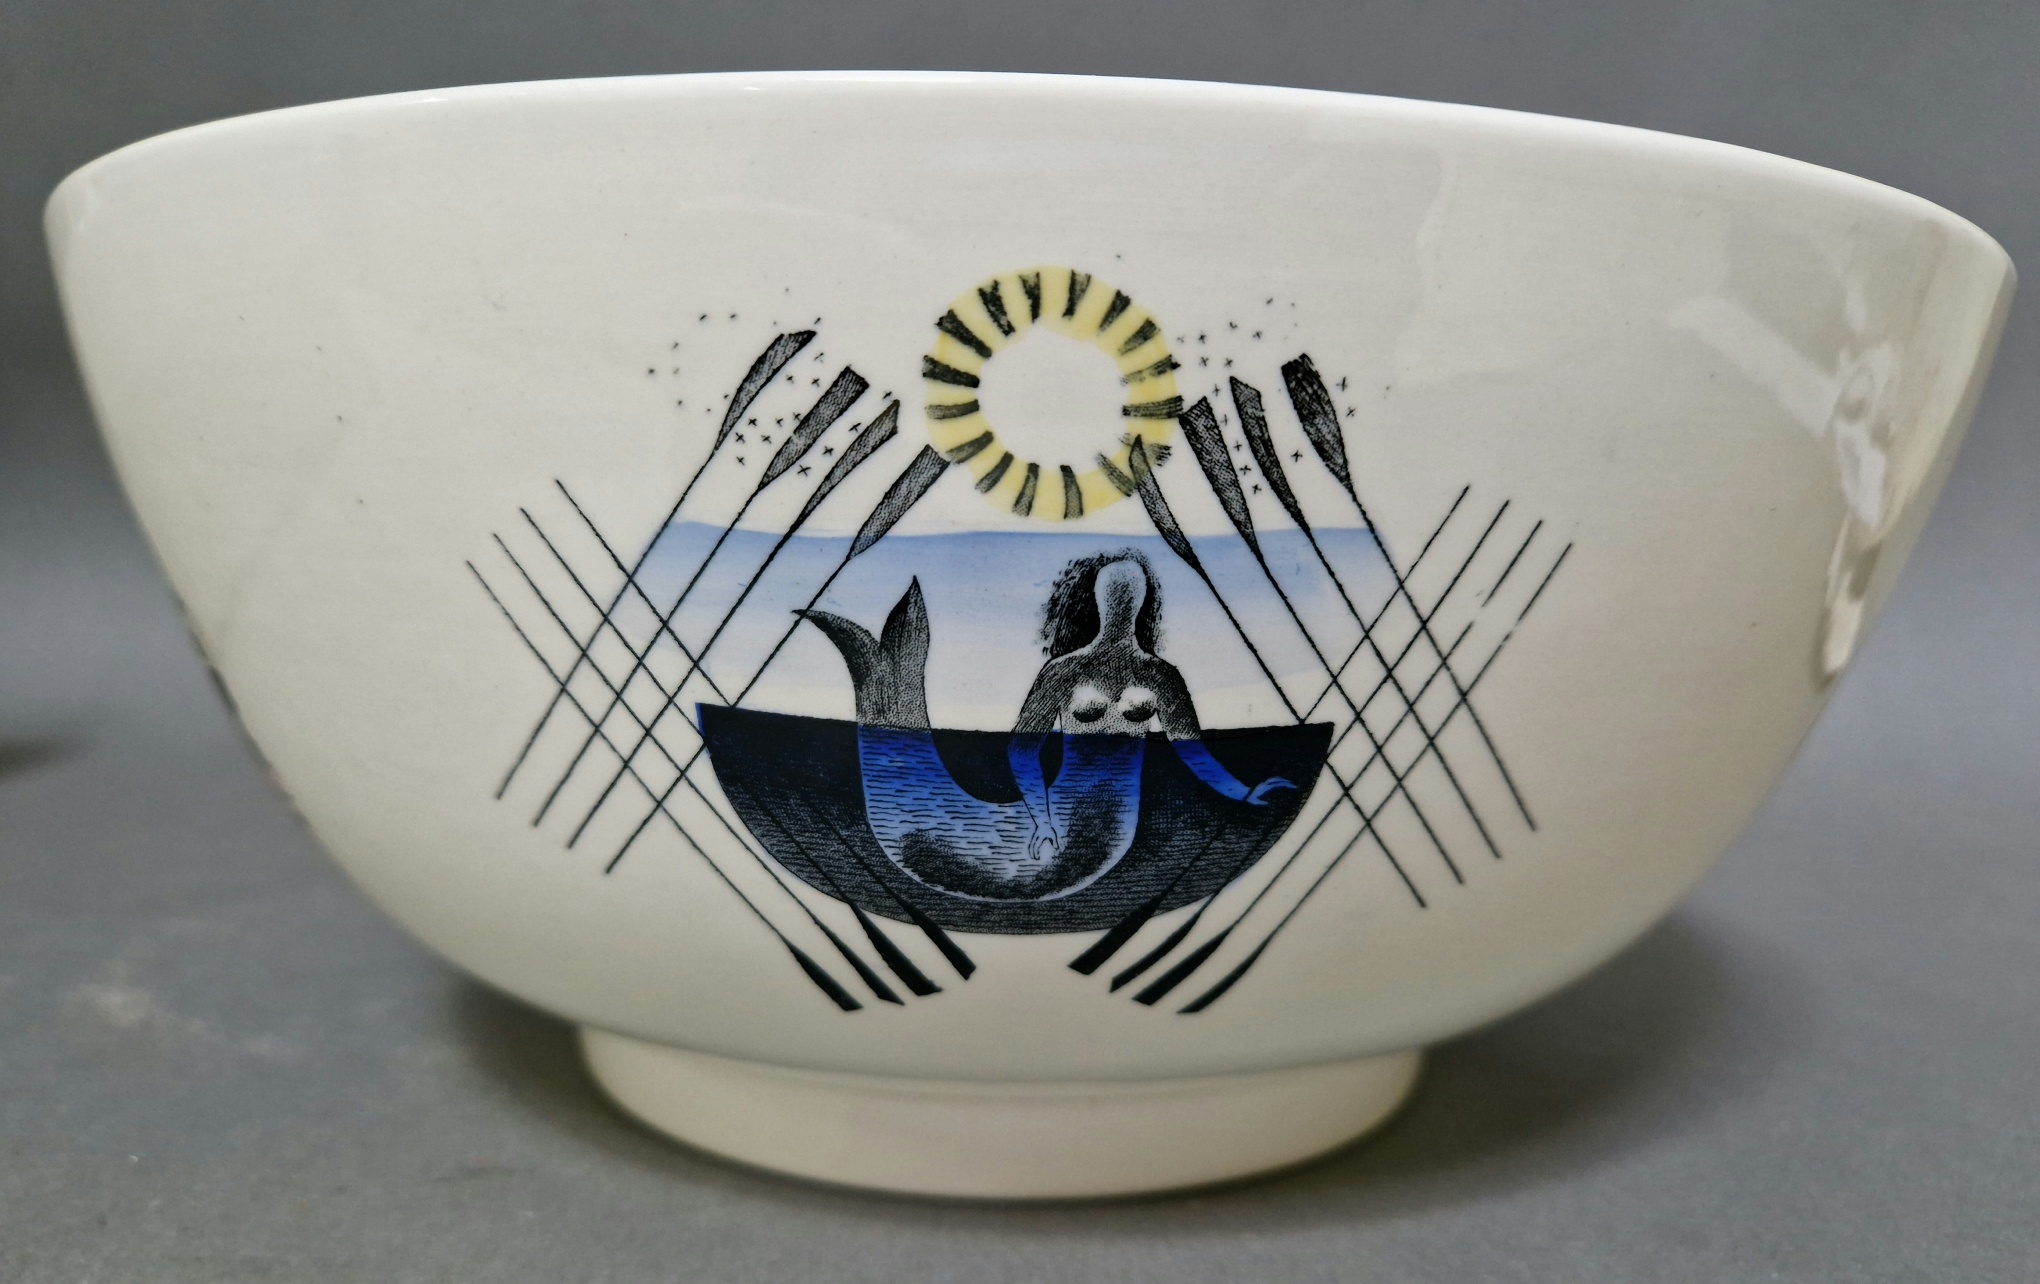 A 1975 Wedgwood Boat Race bowl designed by Eric Ravilious , limited edition no. 133/200, with box - Image 10 of 11